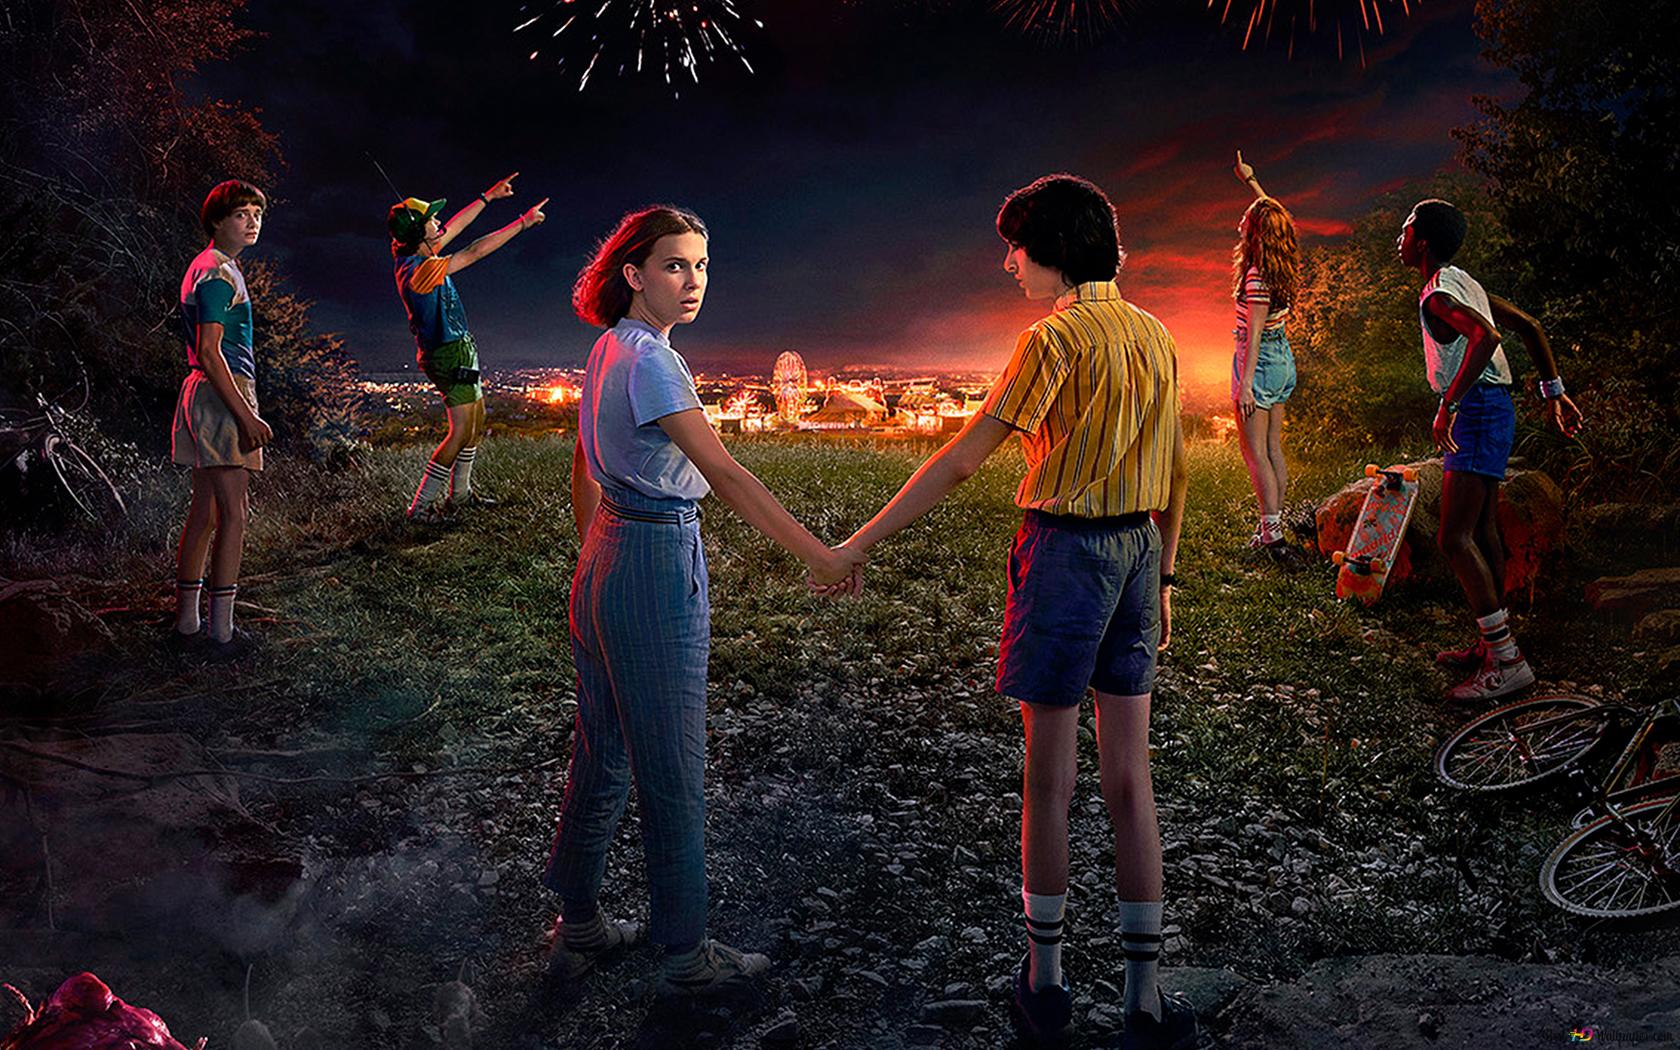 Stranger things leven and finn HD wallpaper download